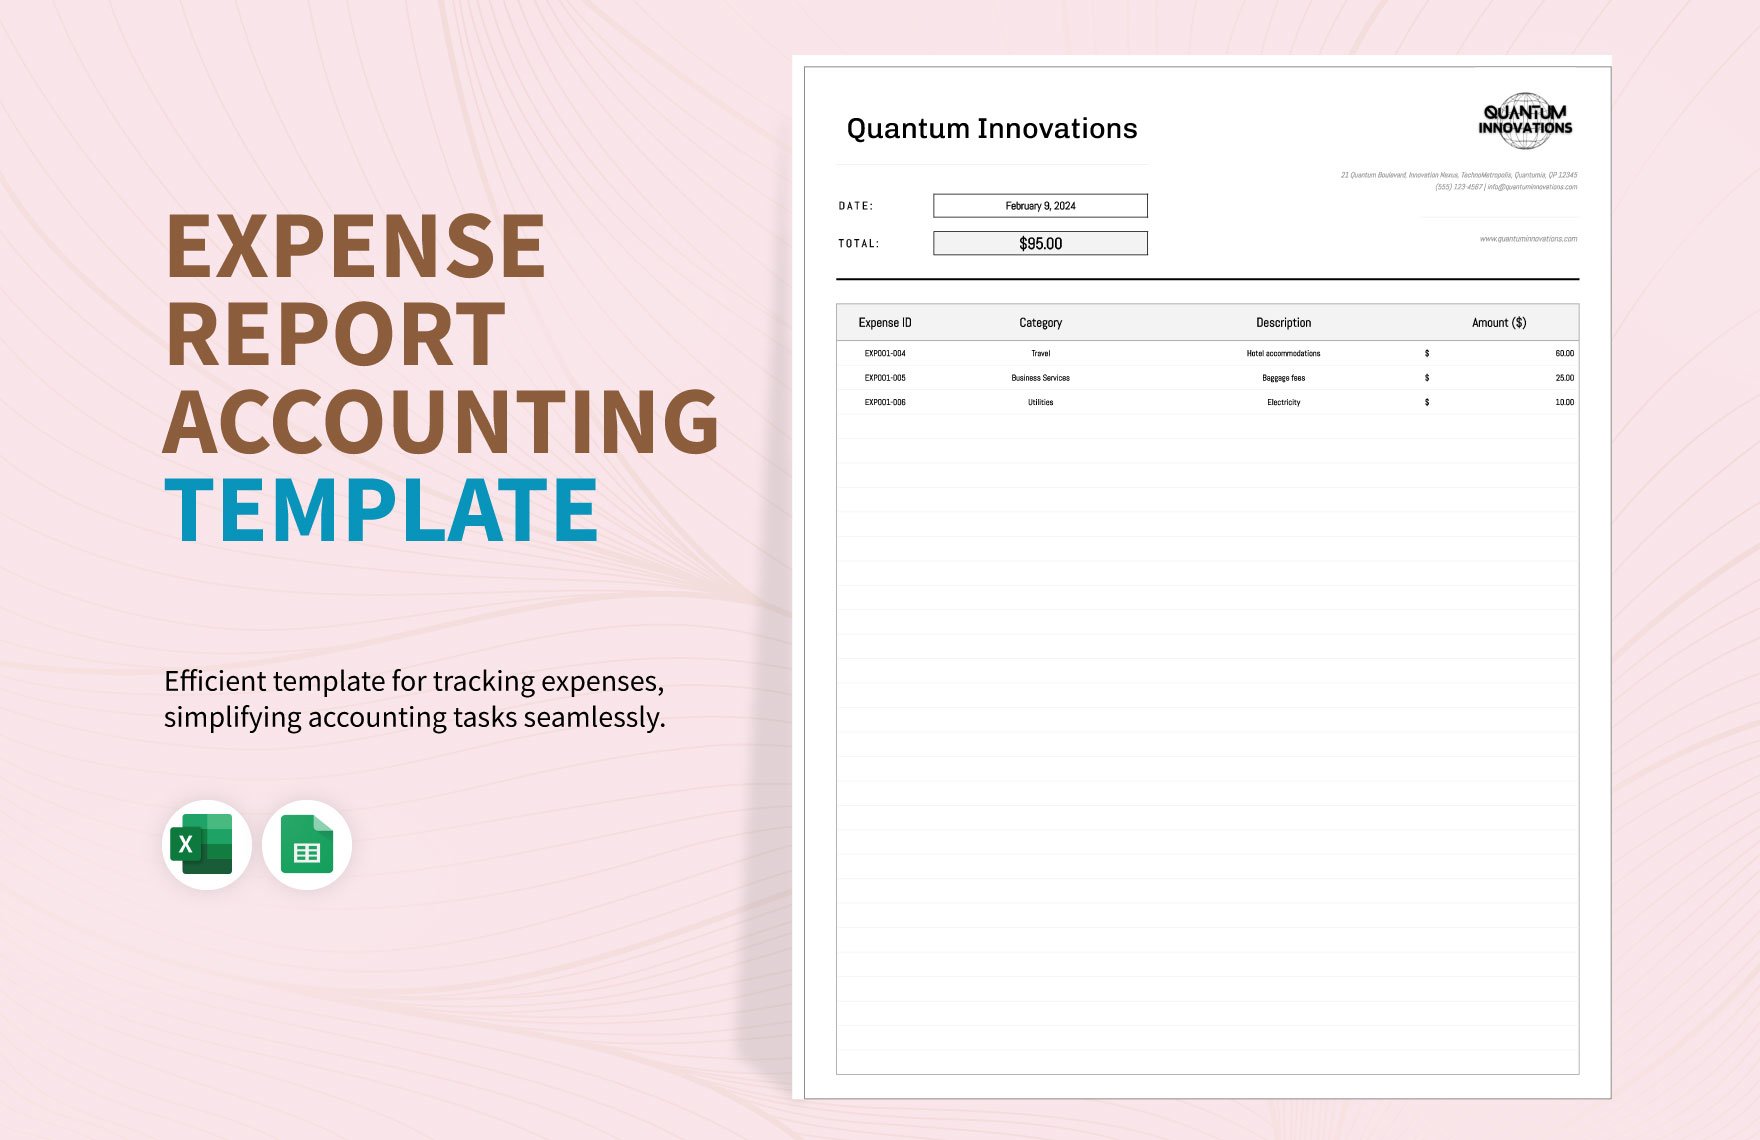 Expense Report Accounting Template in Excel, Google Sheets